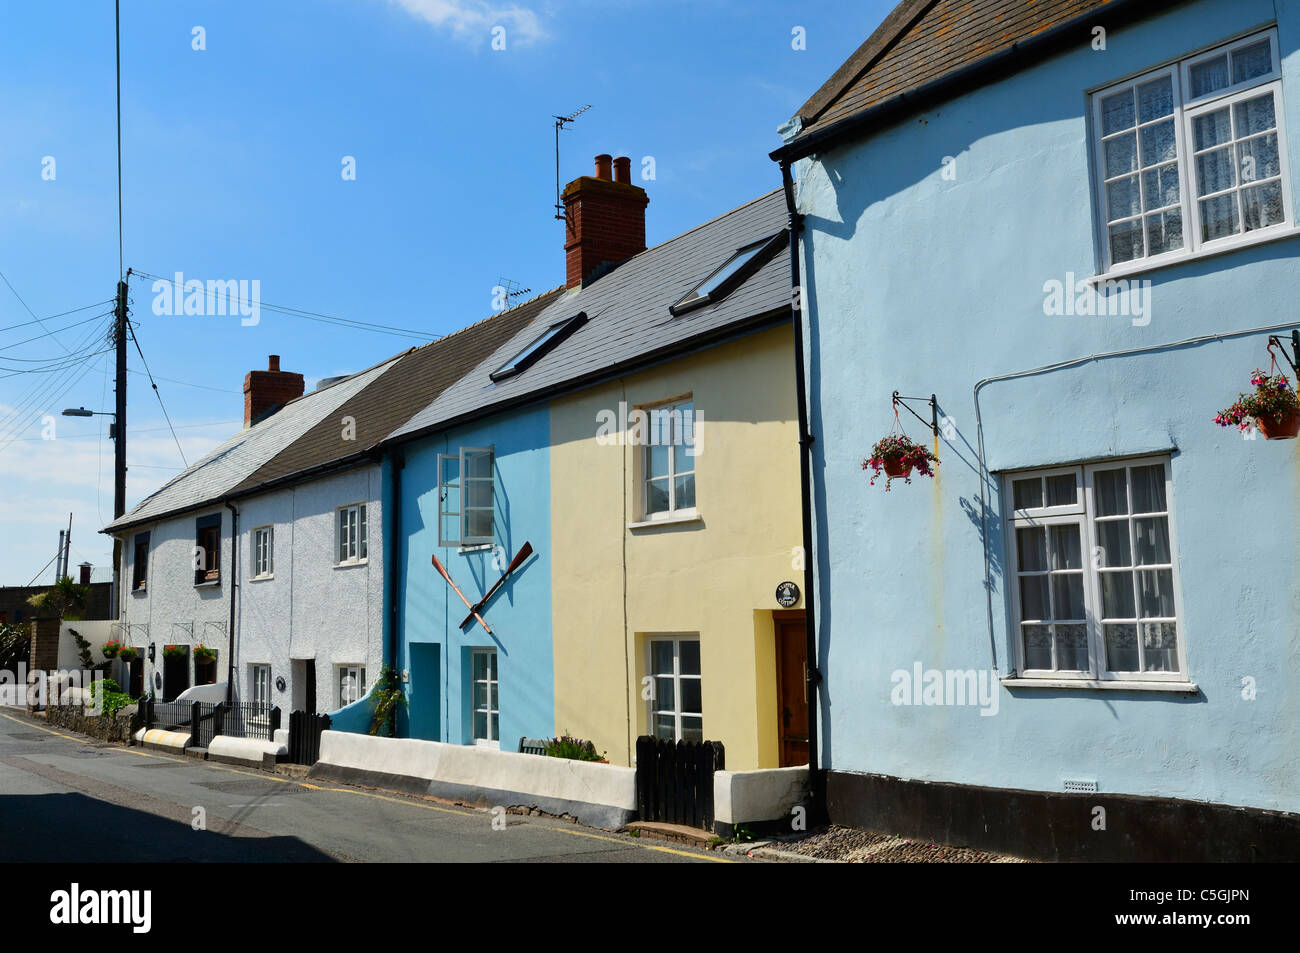 Cottages in Market Street at Watchet Harbour, Somerset, England. Stock Photo